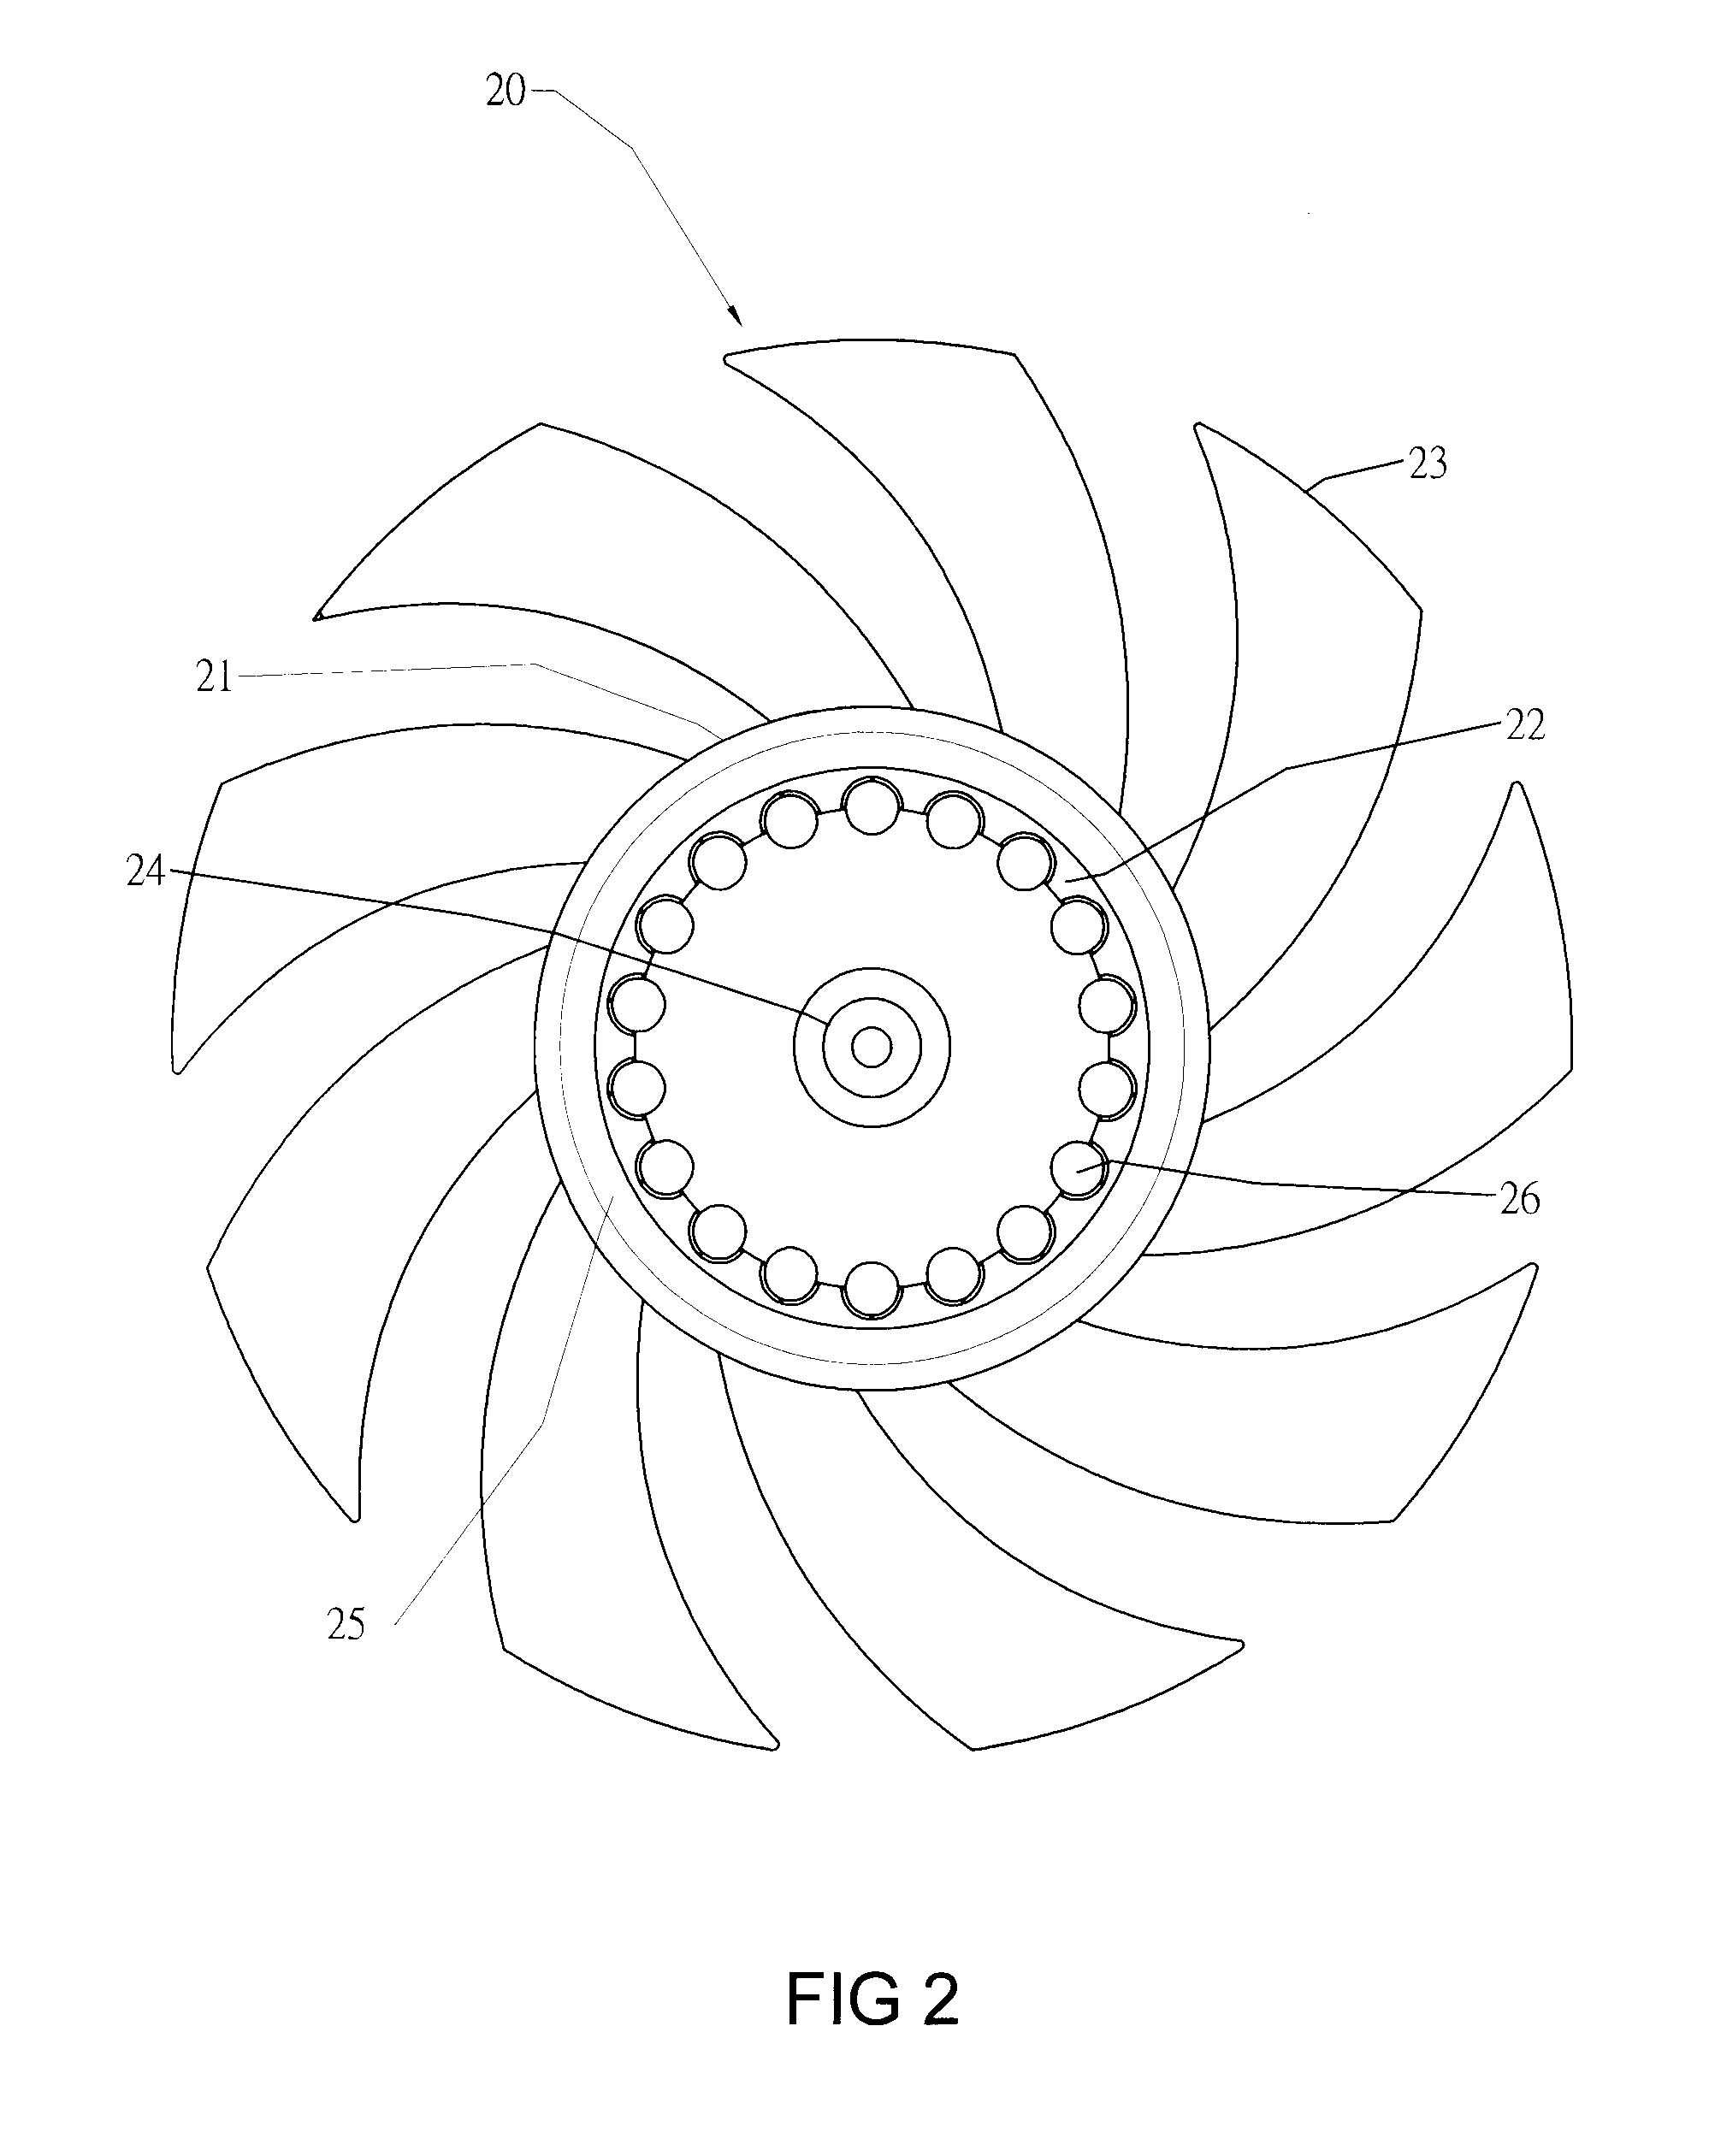 Adjustable device for balancing a fan